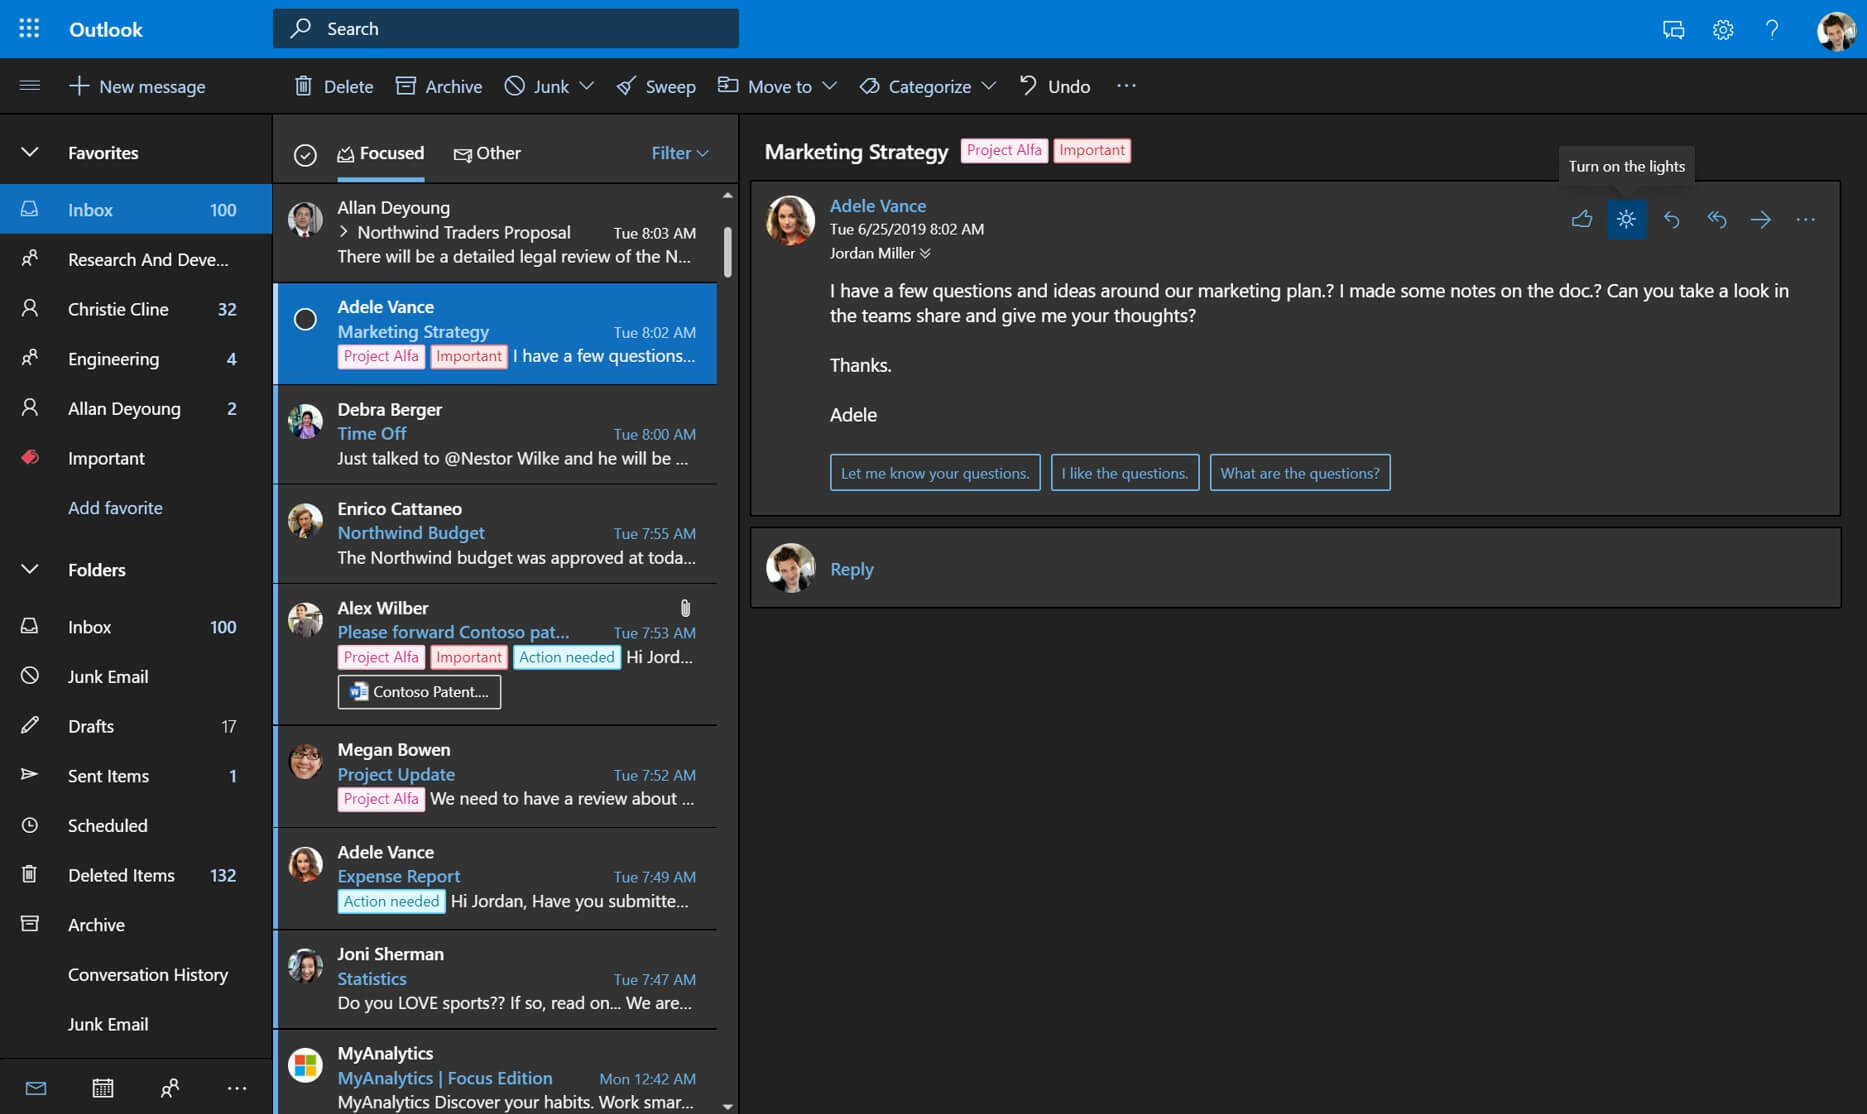 Report: “Smart Compose” feature rolling out for Outlook.com